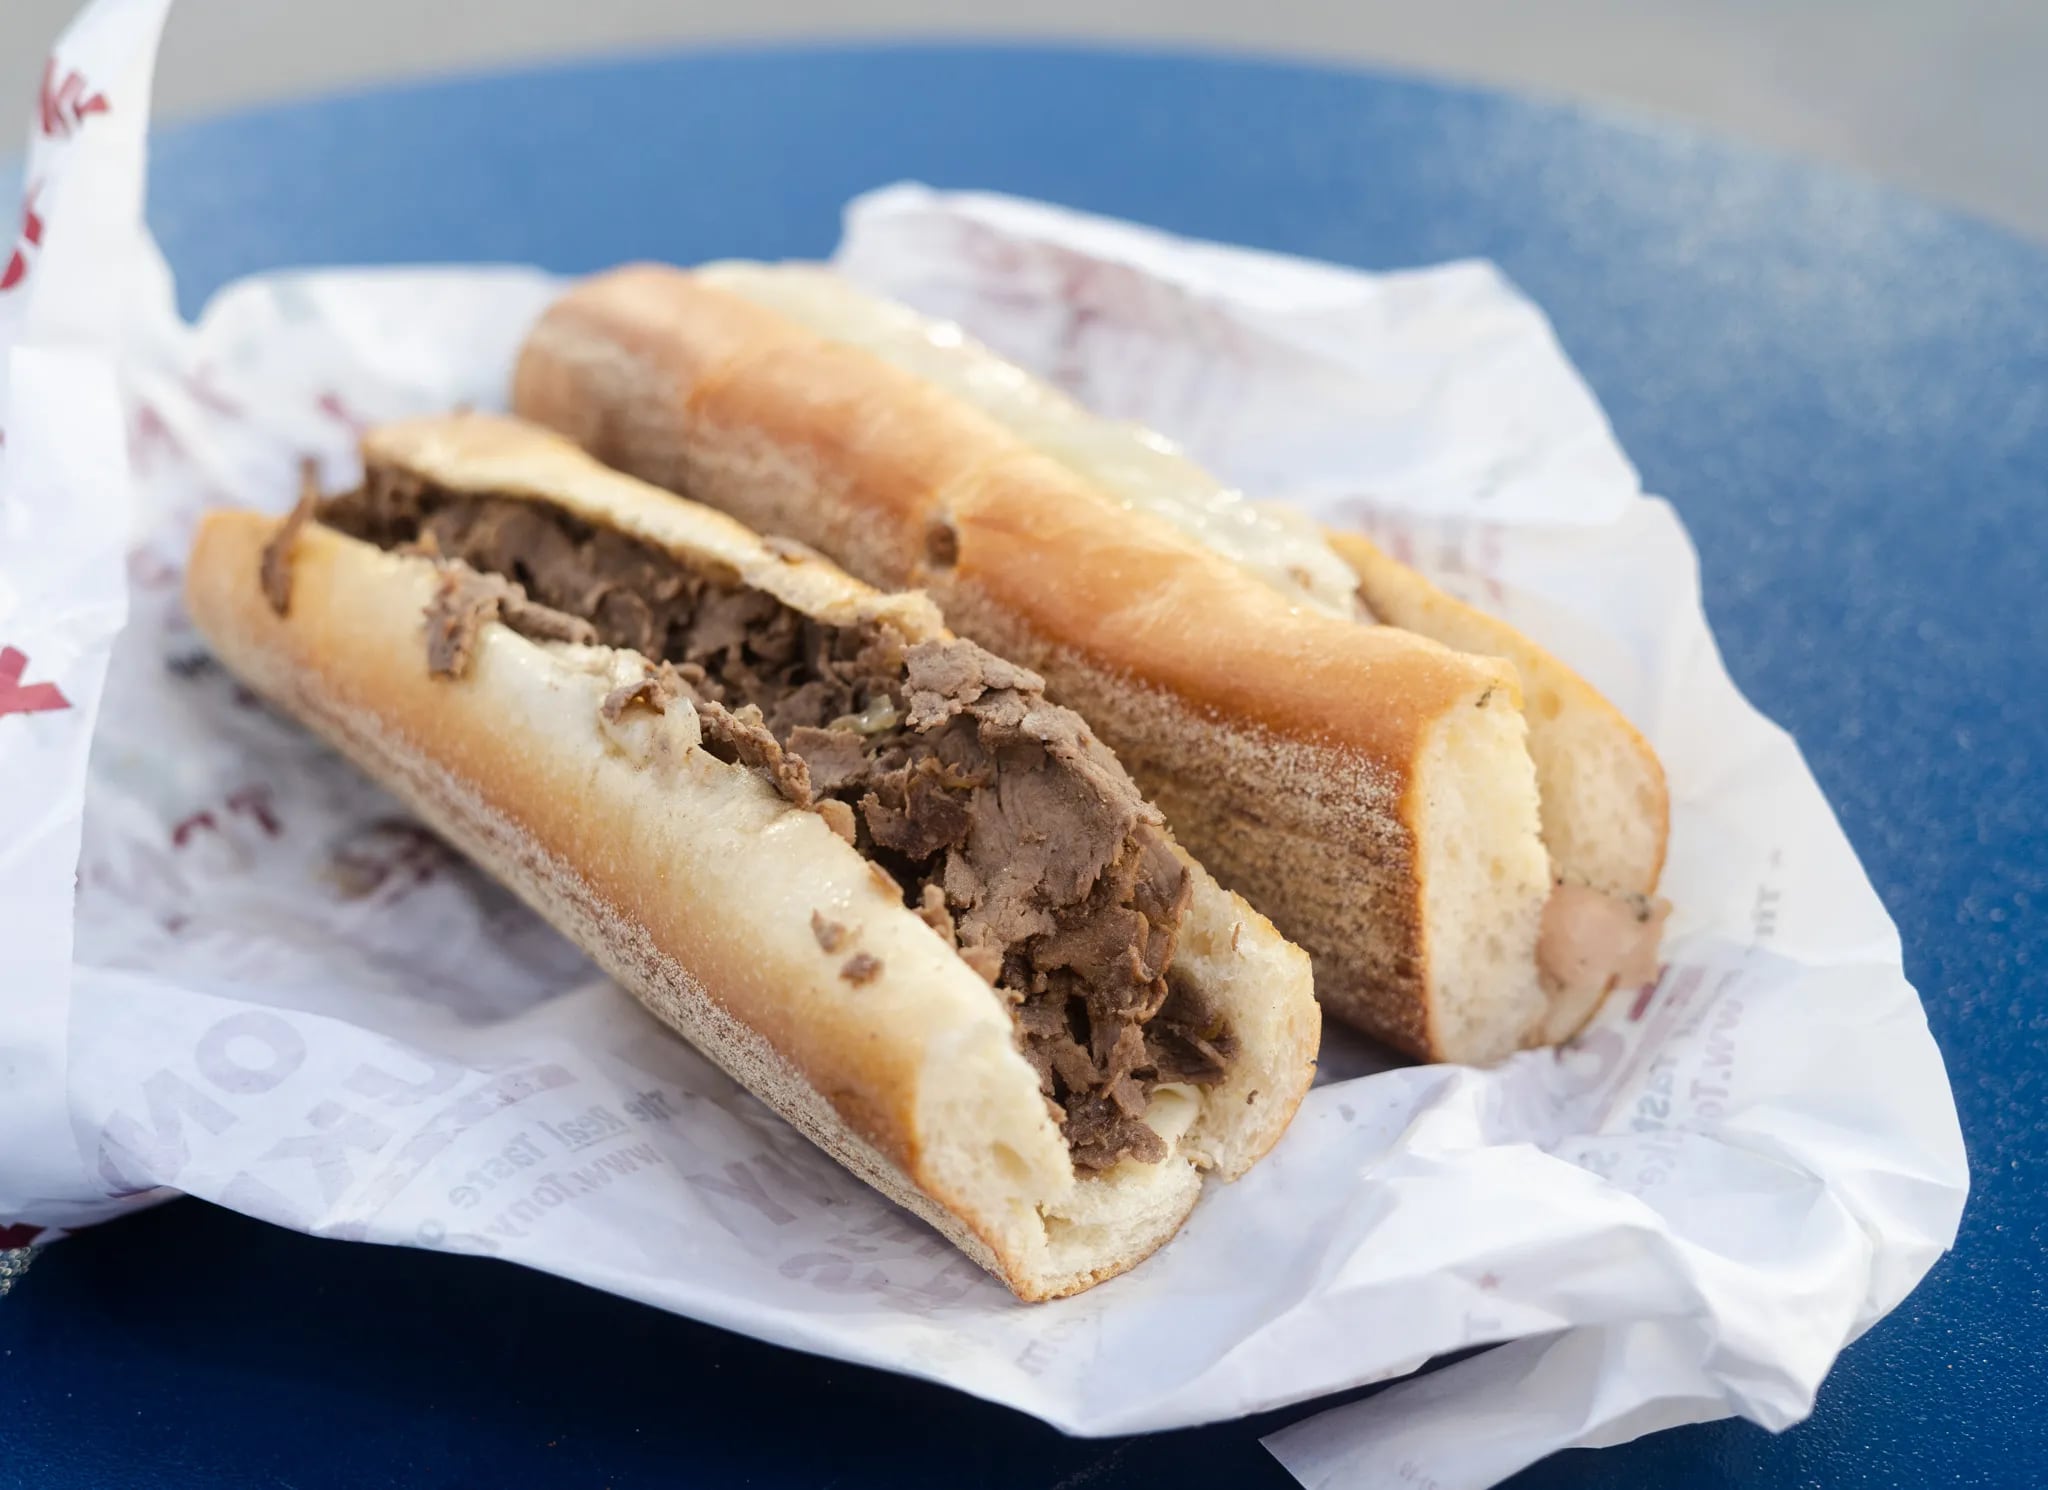 A cheesesteak from Tony Luke's at Citizens Bank Park.